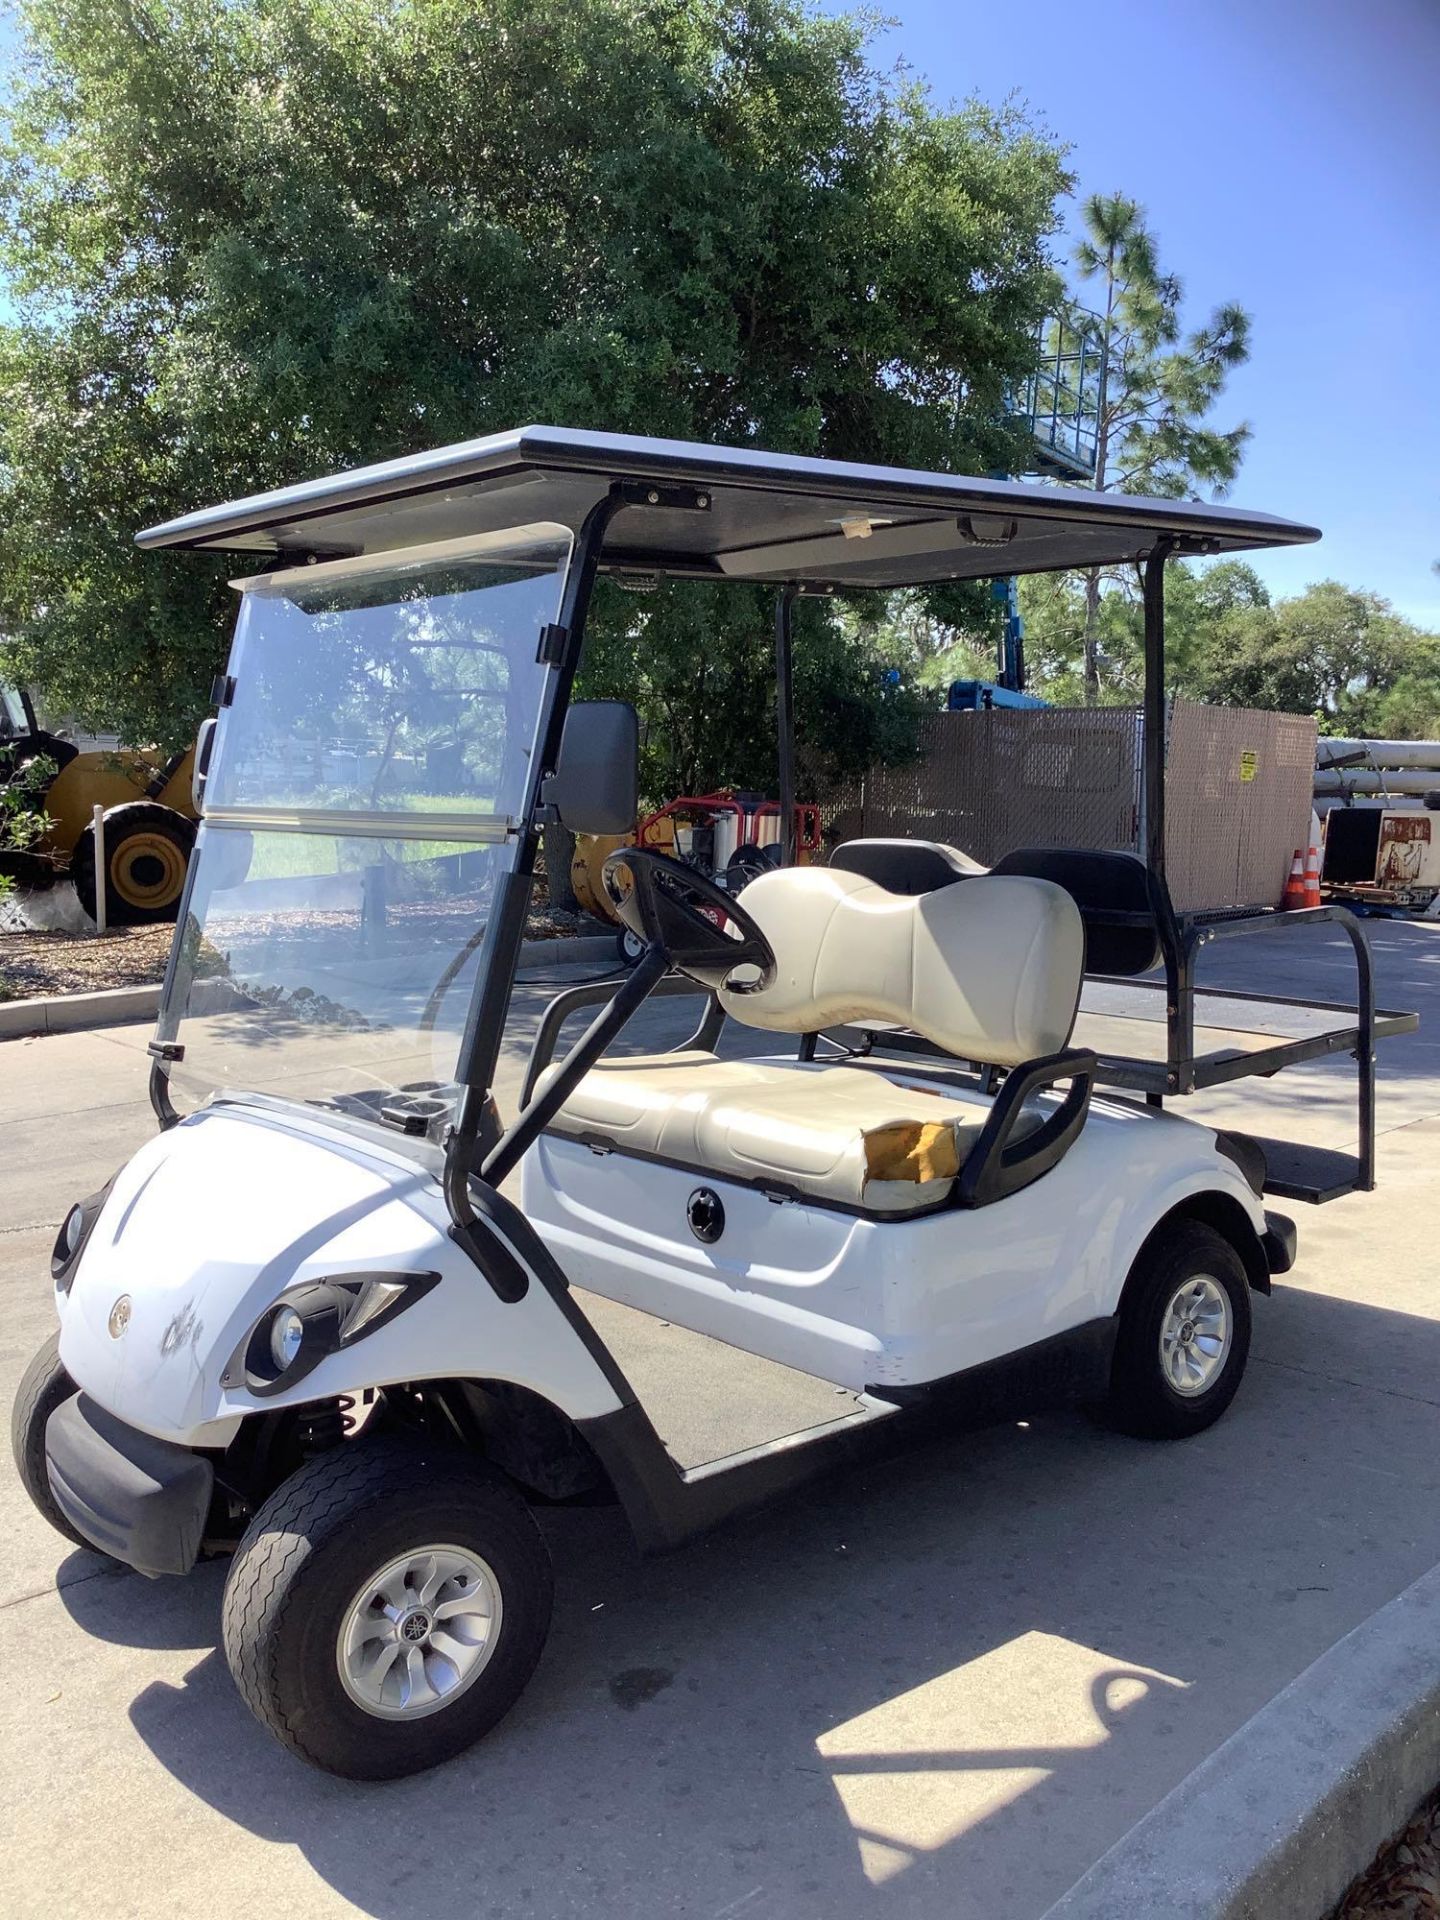 YAMAHA GOLF CART MODEL YDRE3, ELECTRIC, FLAT BED BACK, SOLAR PANEL ROOF ATTACHED, ELECTRIC , RUNS AN